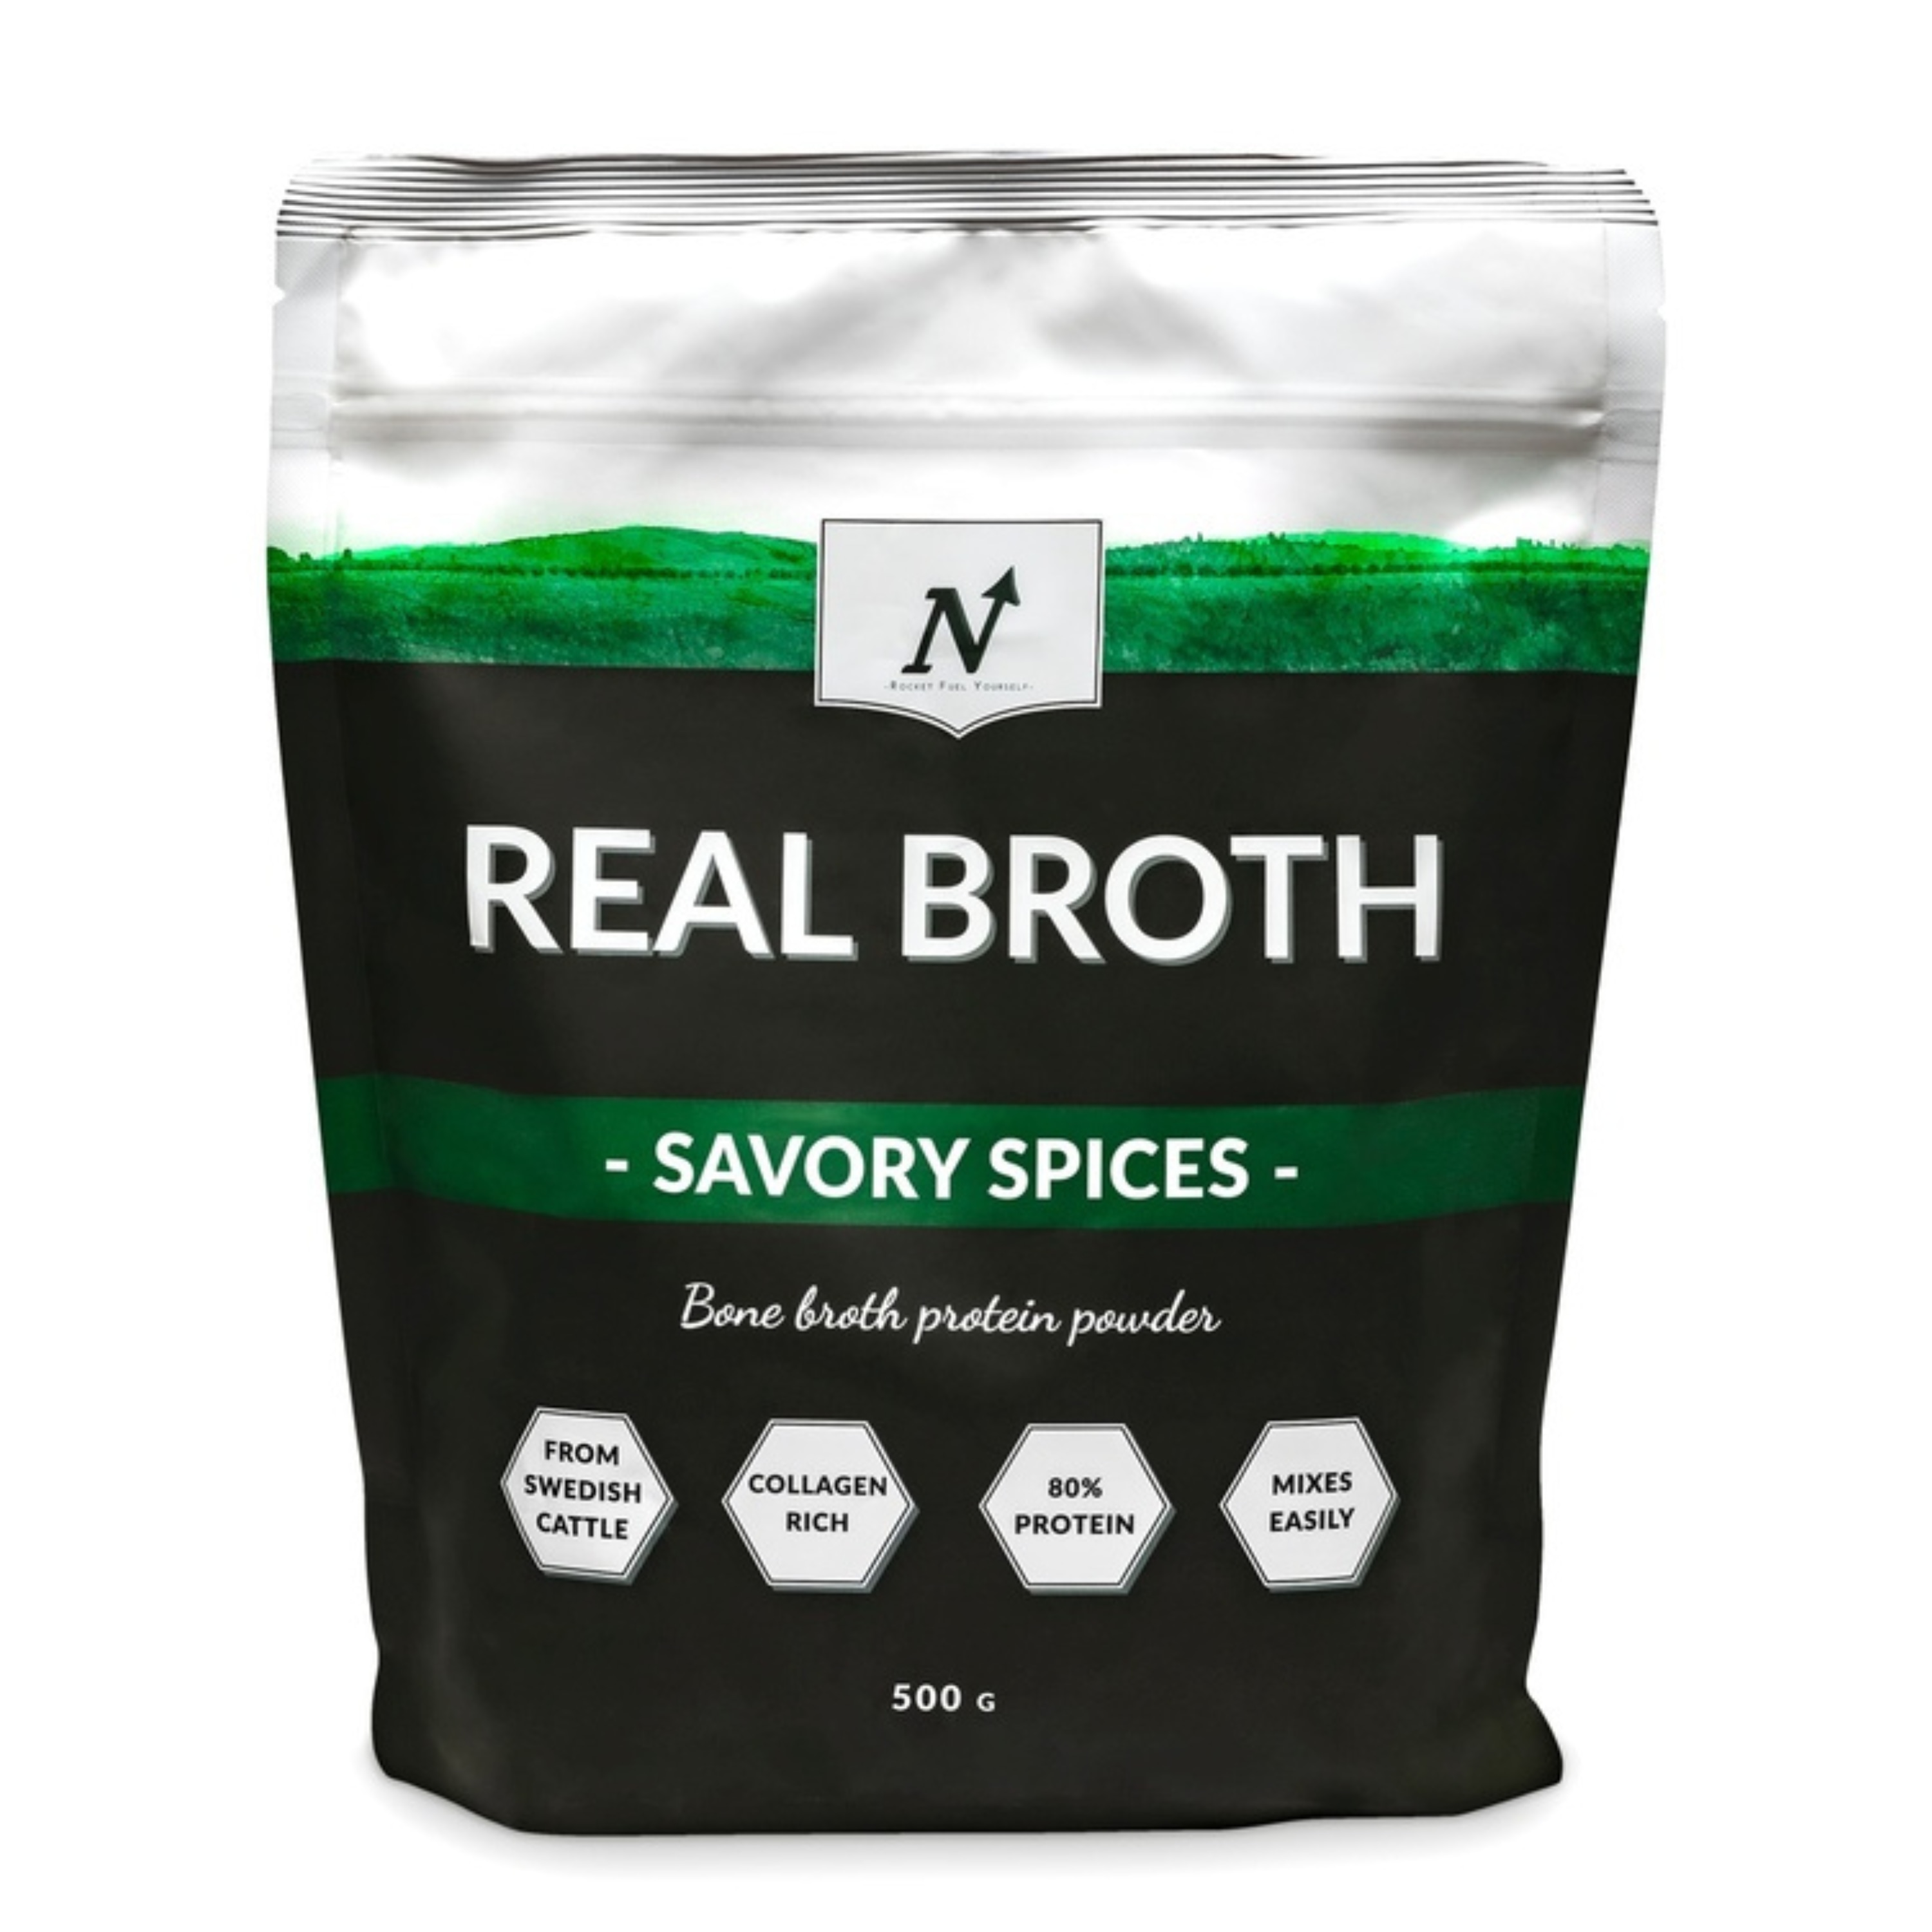 Real Broth Savory Spices 500g